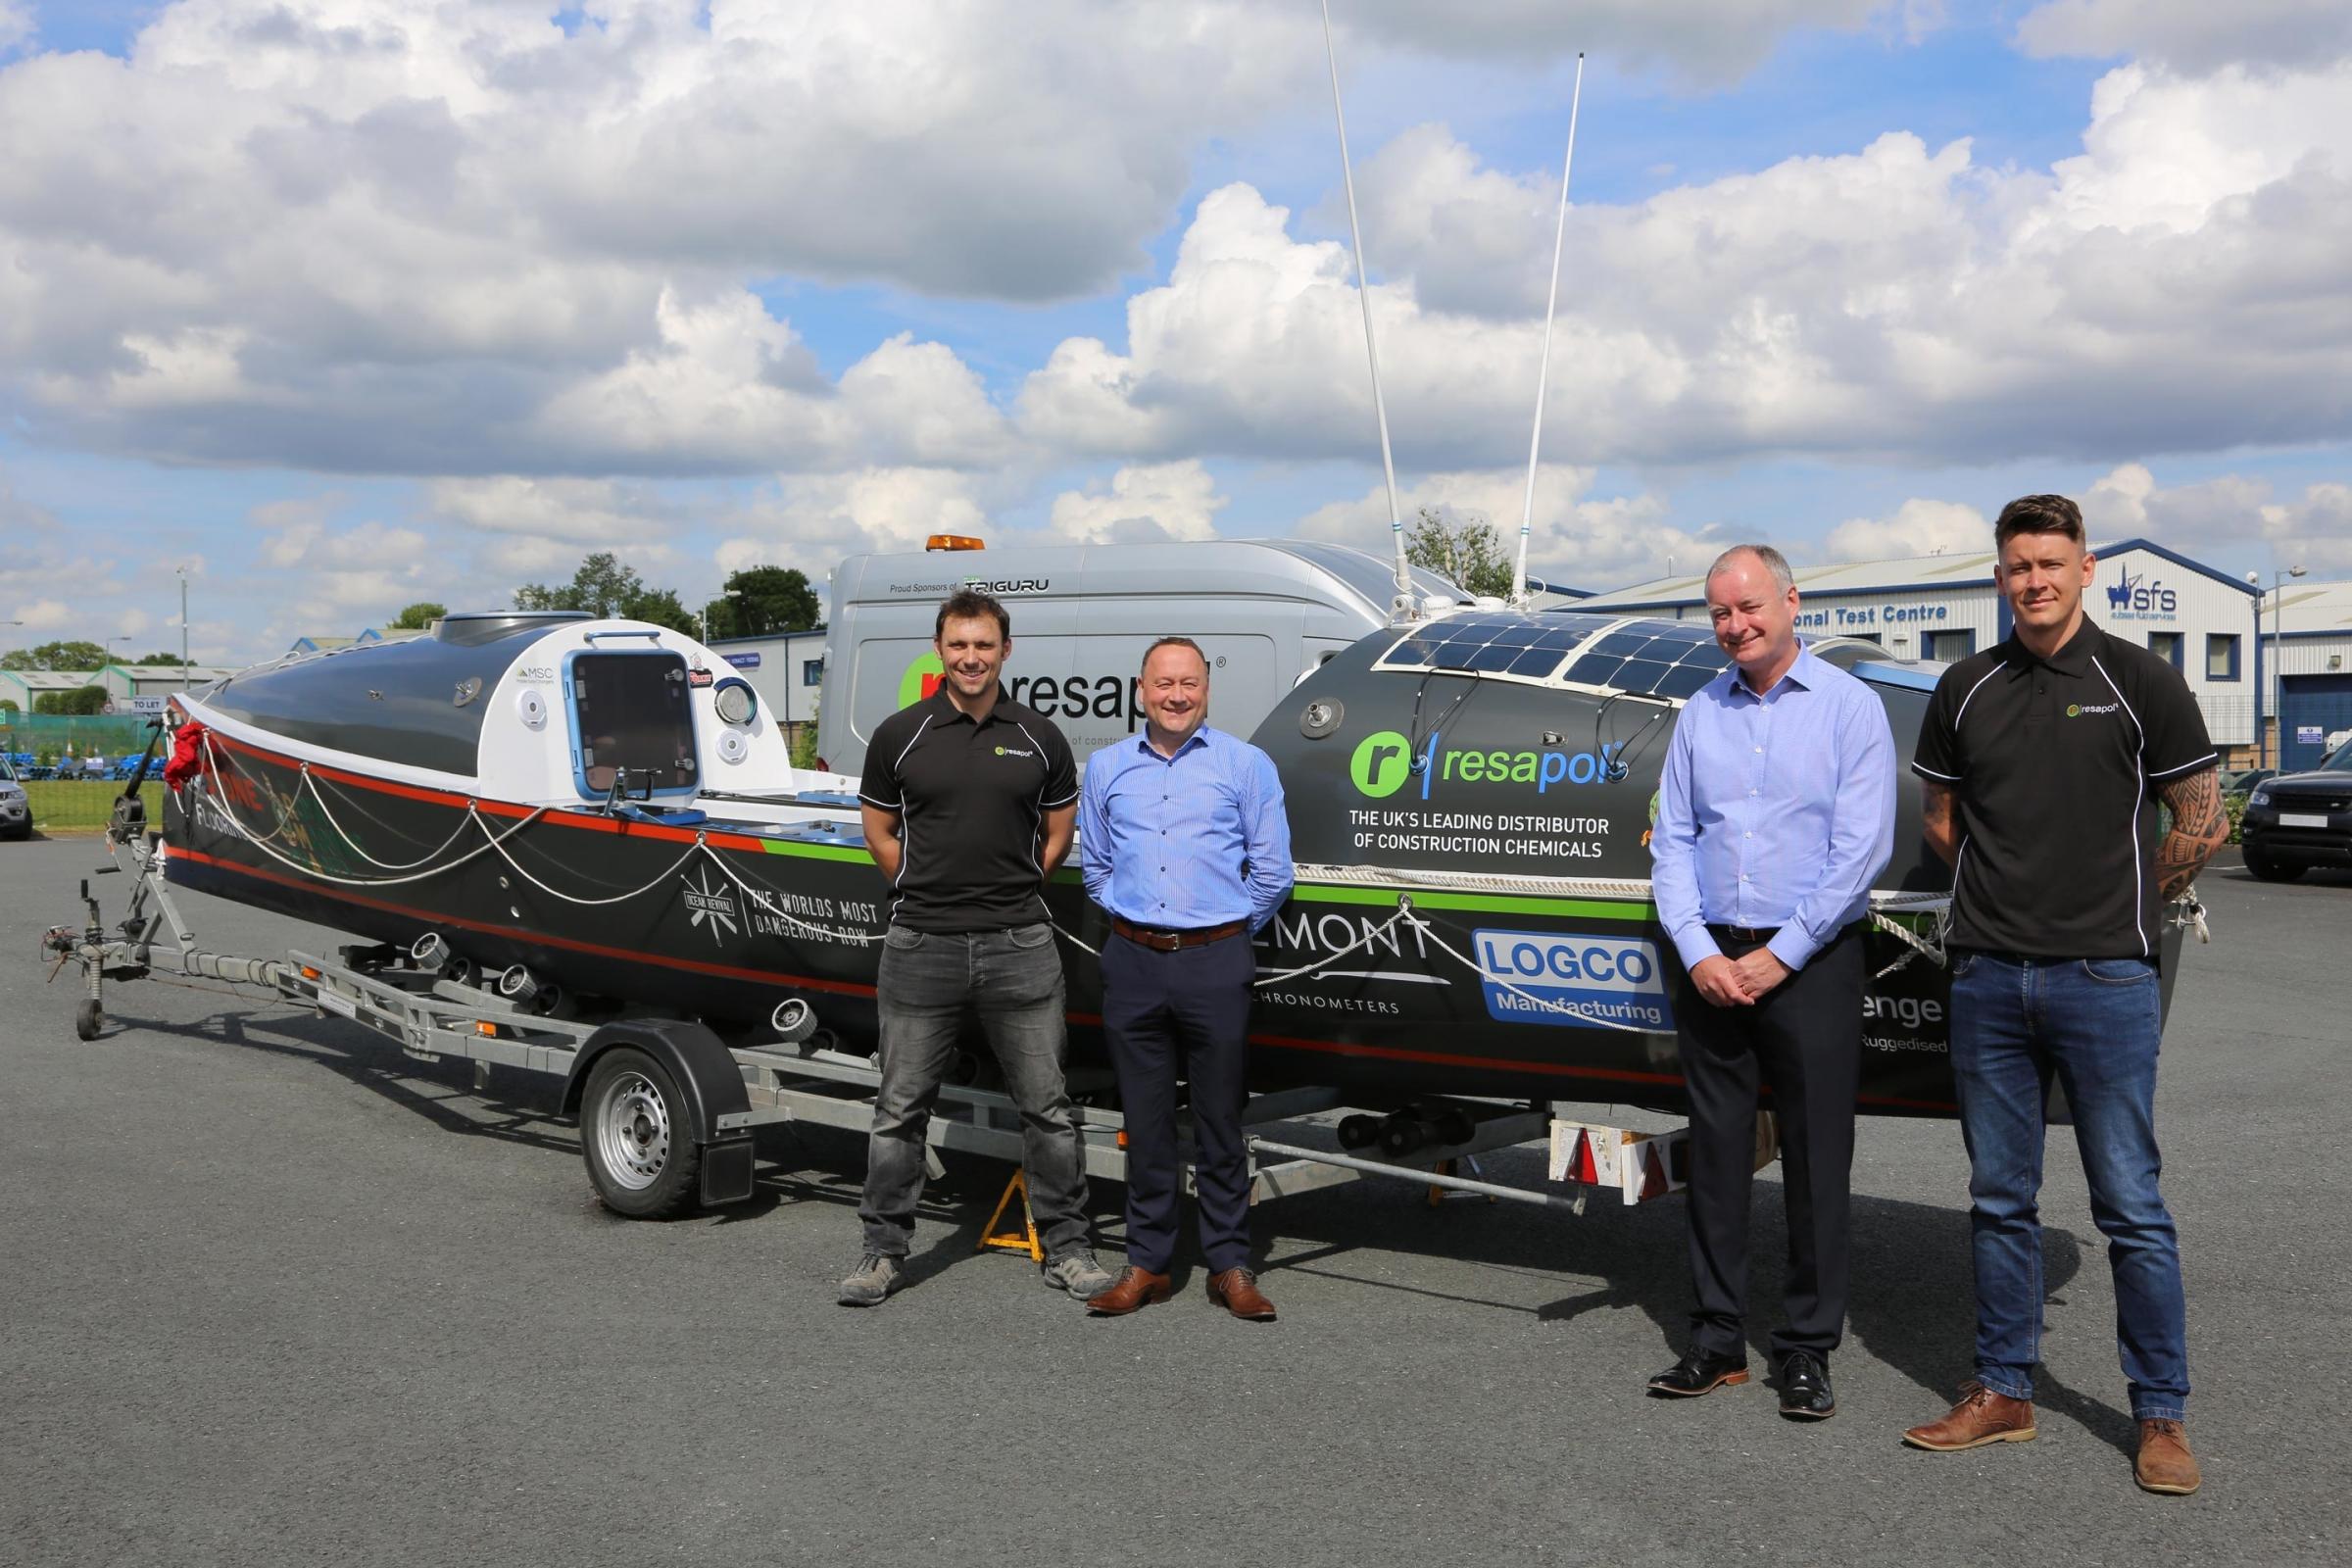 Left to right: Matt Mason, serving Royal Marine Commando and member of the Ocean Revival 2020 crew; Sean Ofsarnie, Director and Co-founder of Resapol; Lloyd Phillips Director and Co-founder of Resapol; Dom Rogers, former Royal Marine Commando and